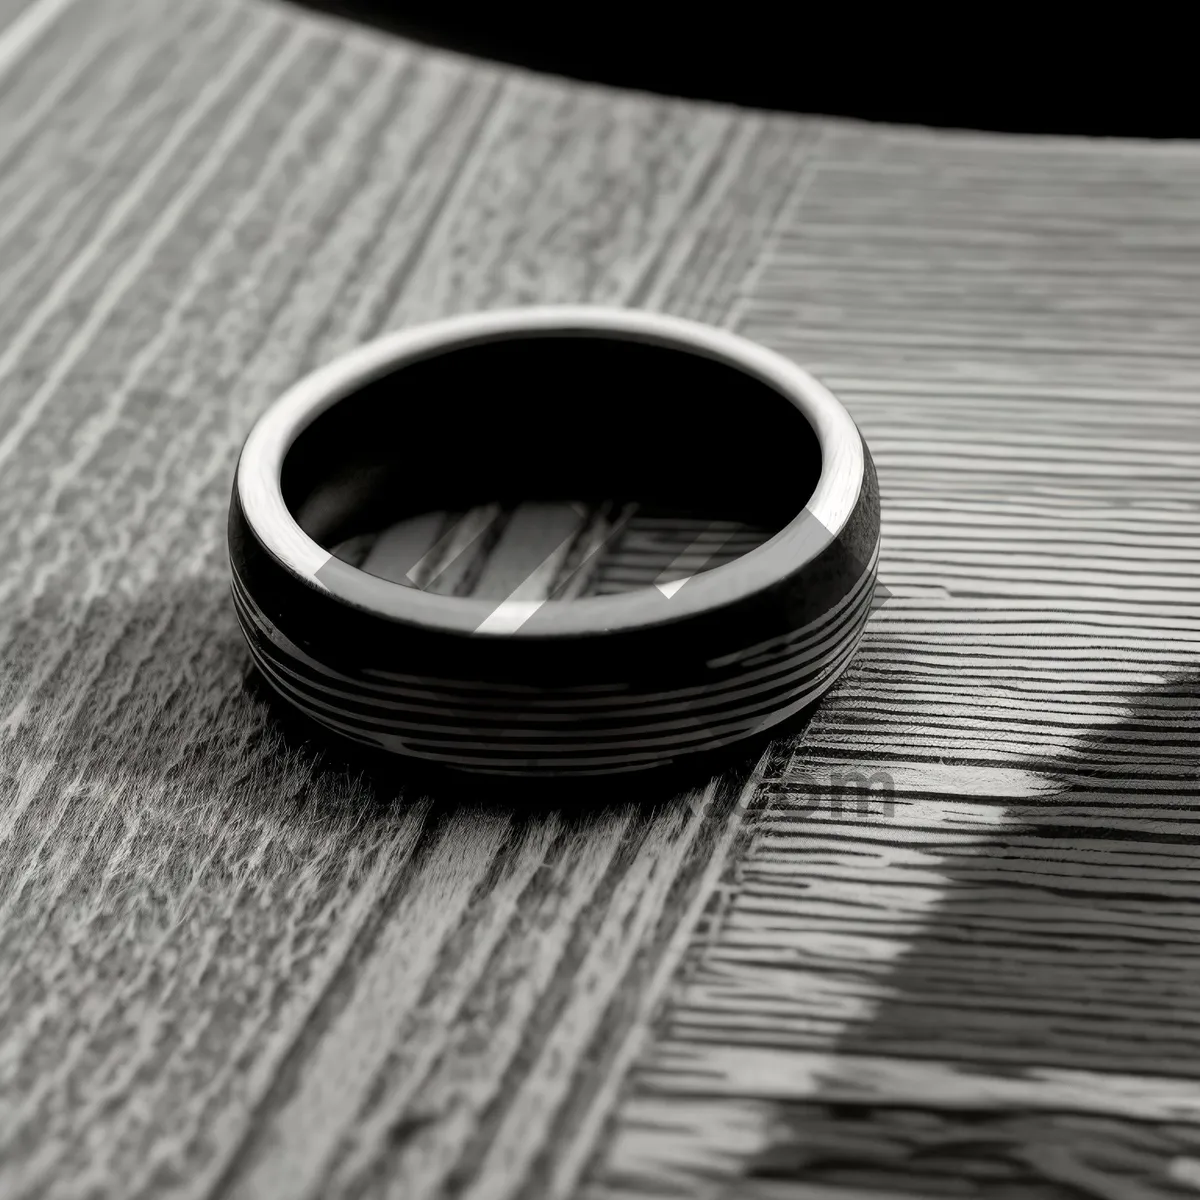 Picture of Hot Coffee Cup with Lens Cap